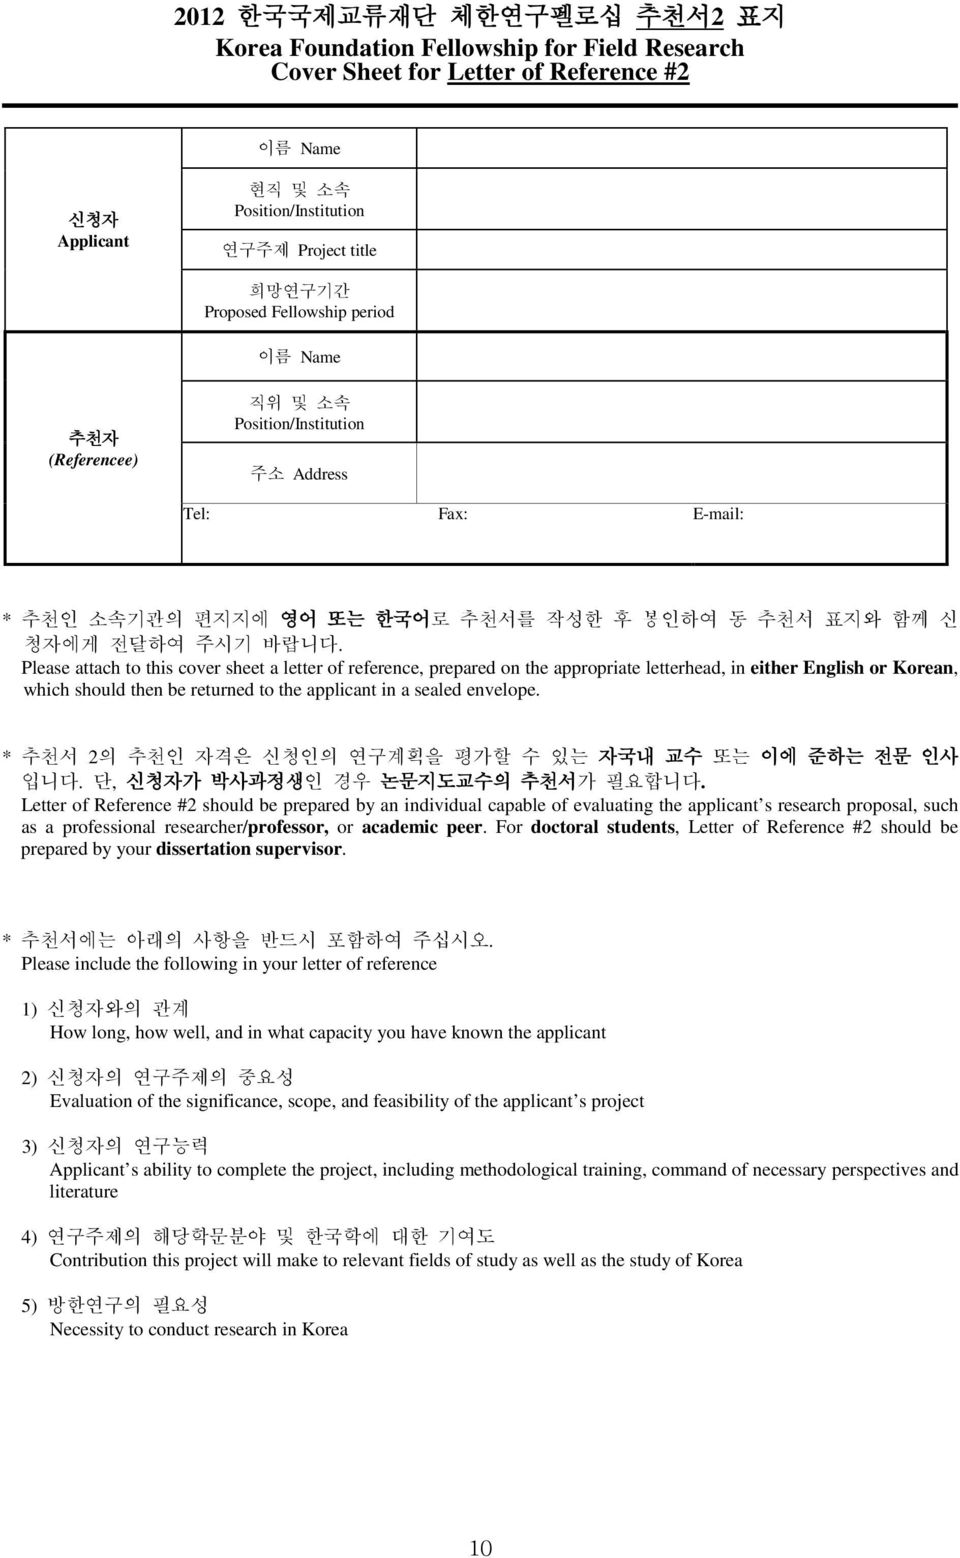 Please attach to this cover sheet a letter of reference, prepared on the appropriate letterhead, in either English or Korean, which should then be returned to the applicant in a sealed envelope.